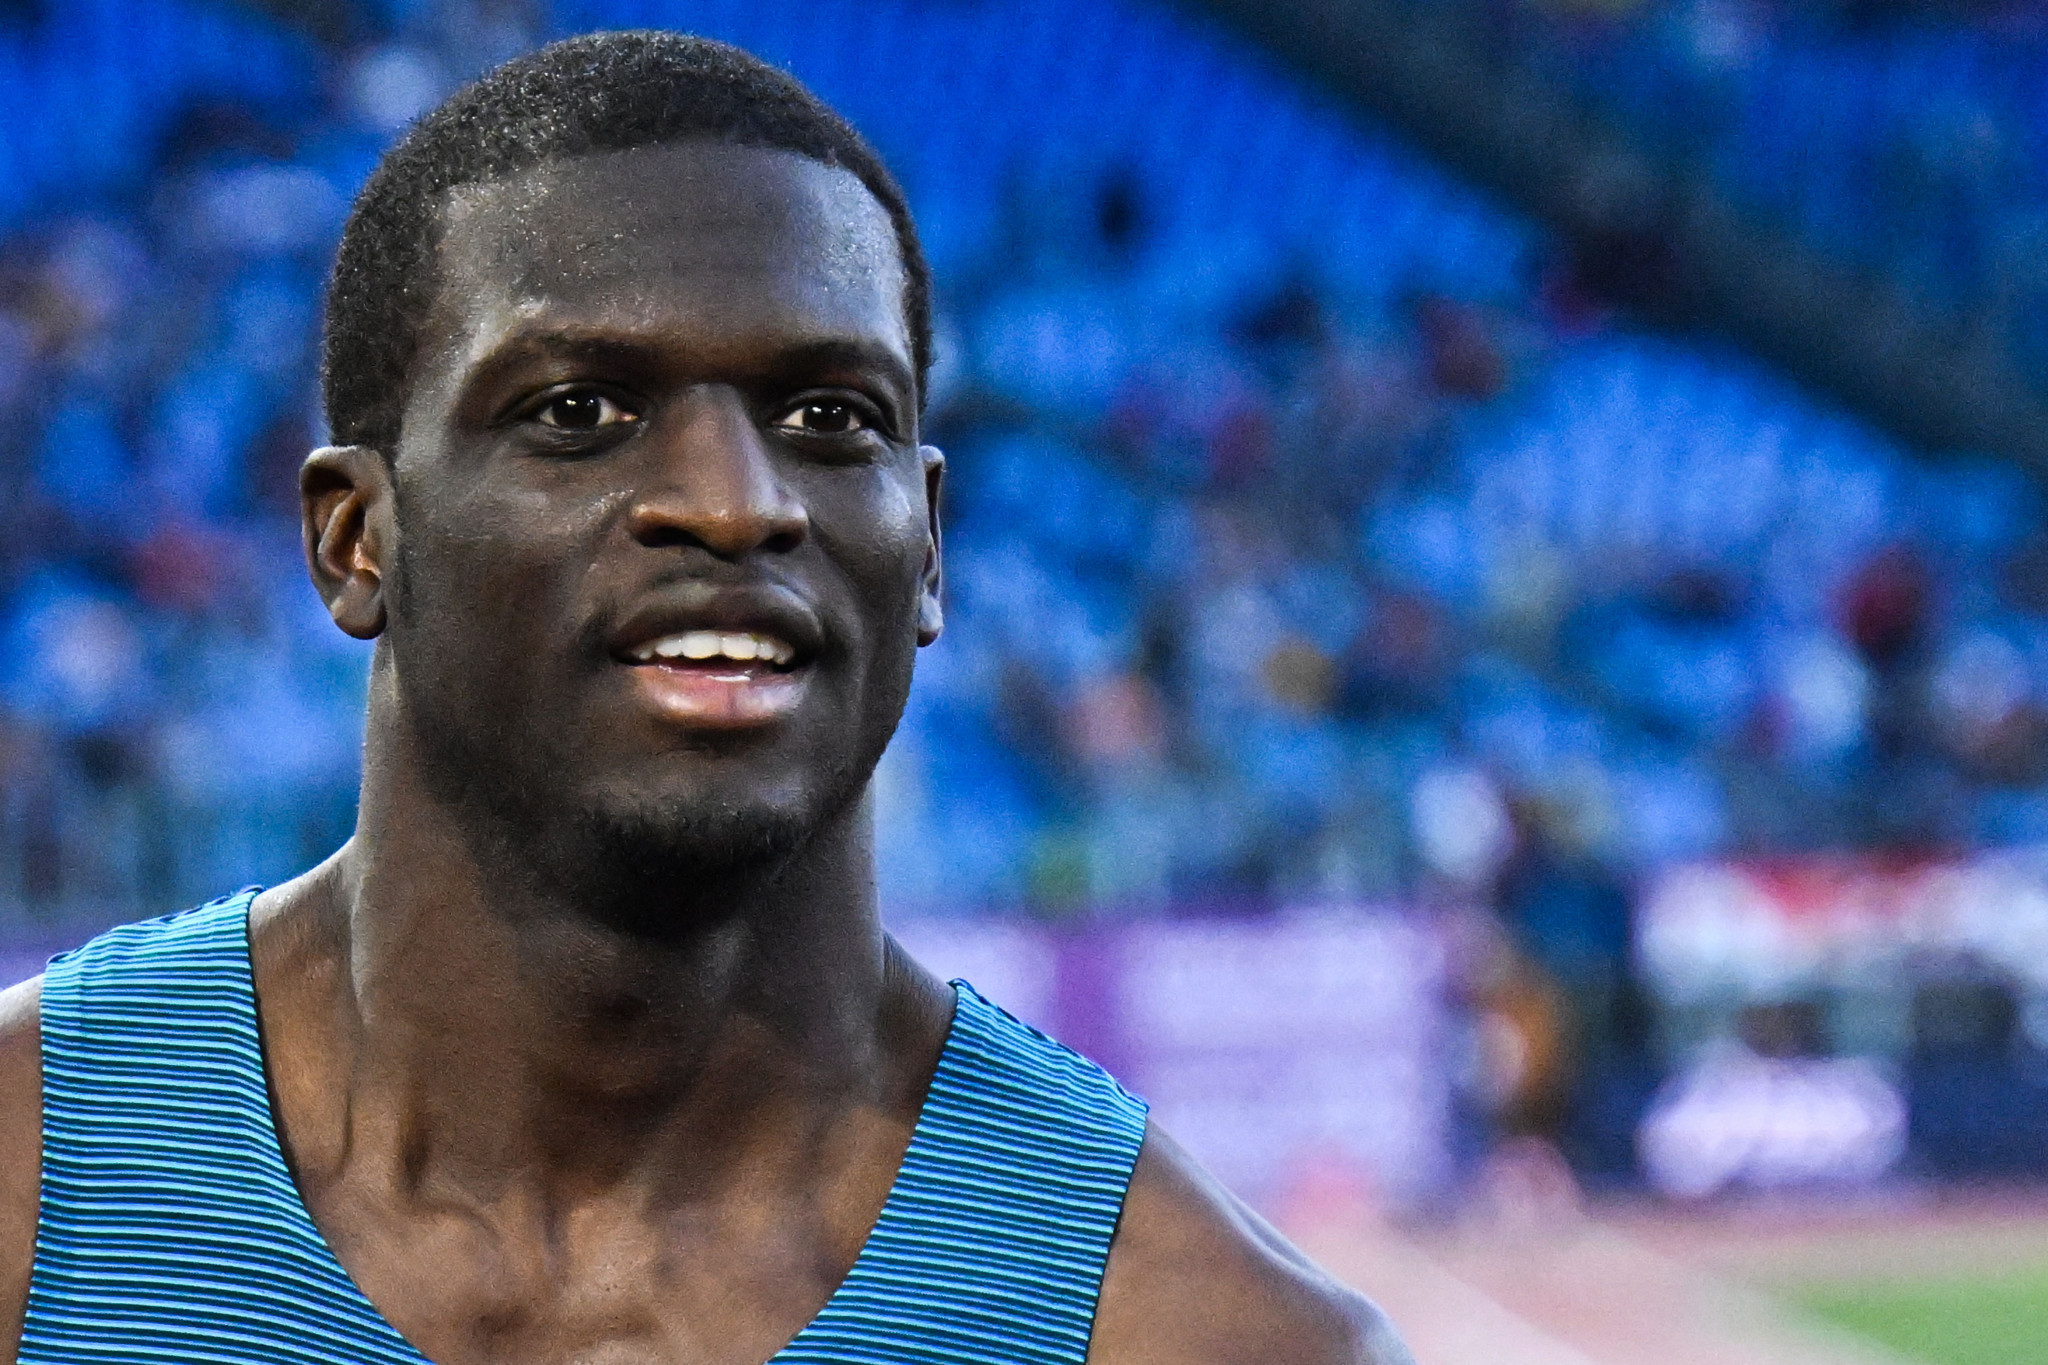 Kirani James will not be a part of Grenada's Commonwealth Games team ©Getty Images